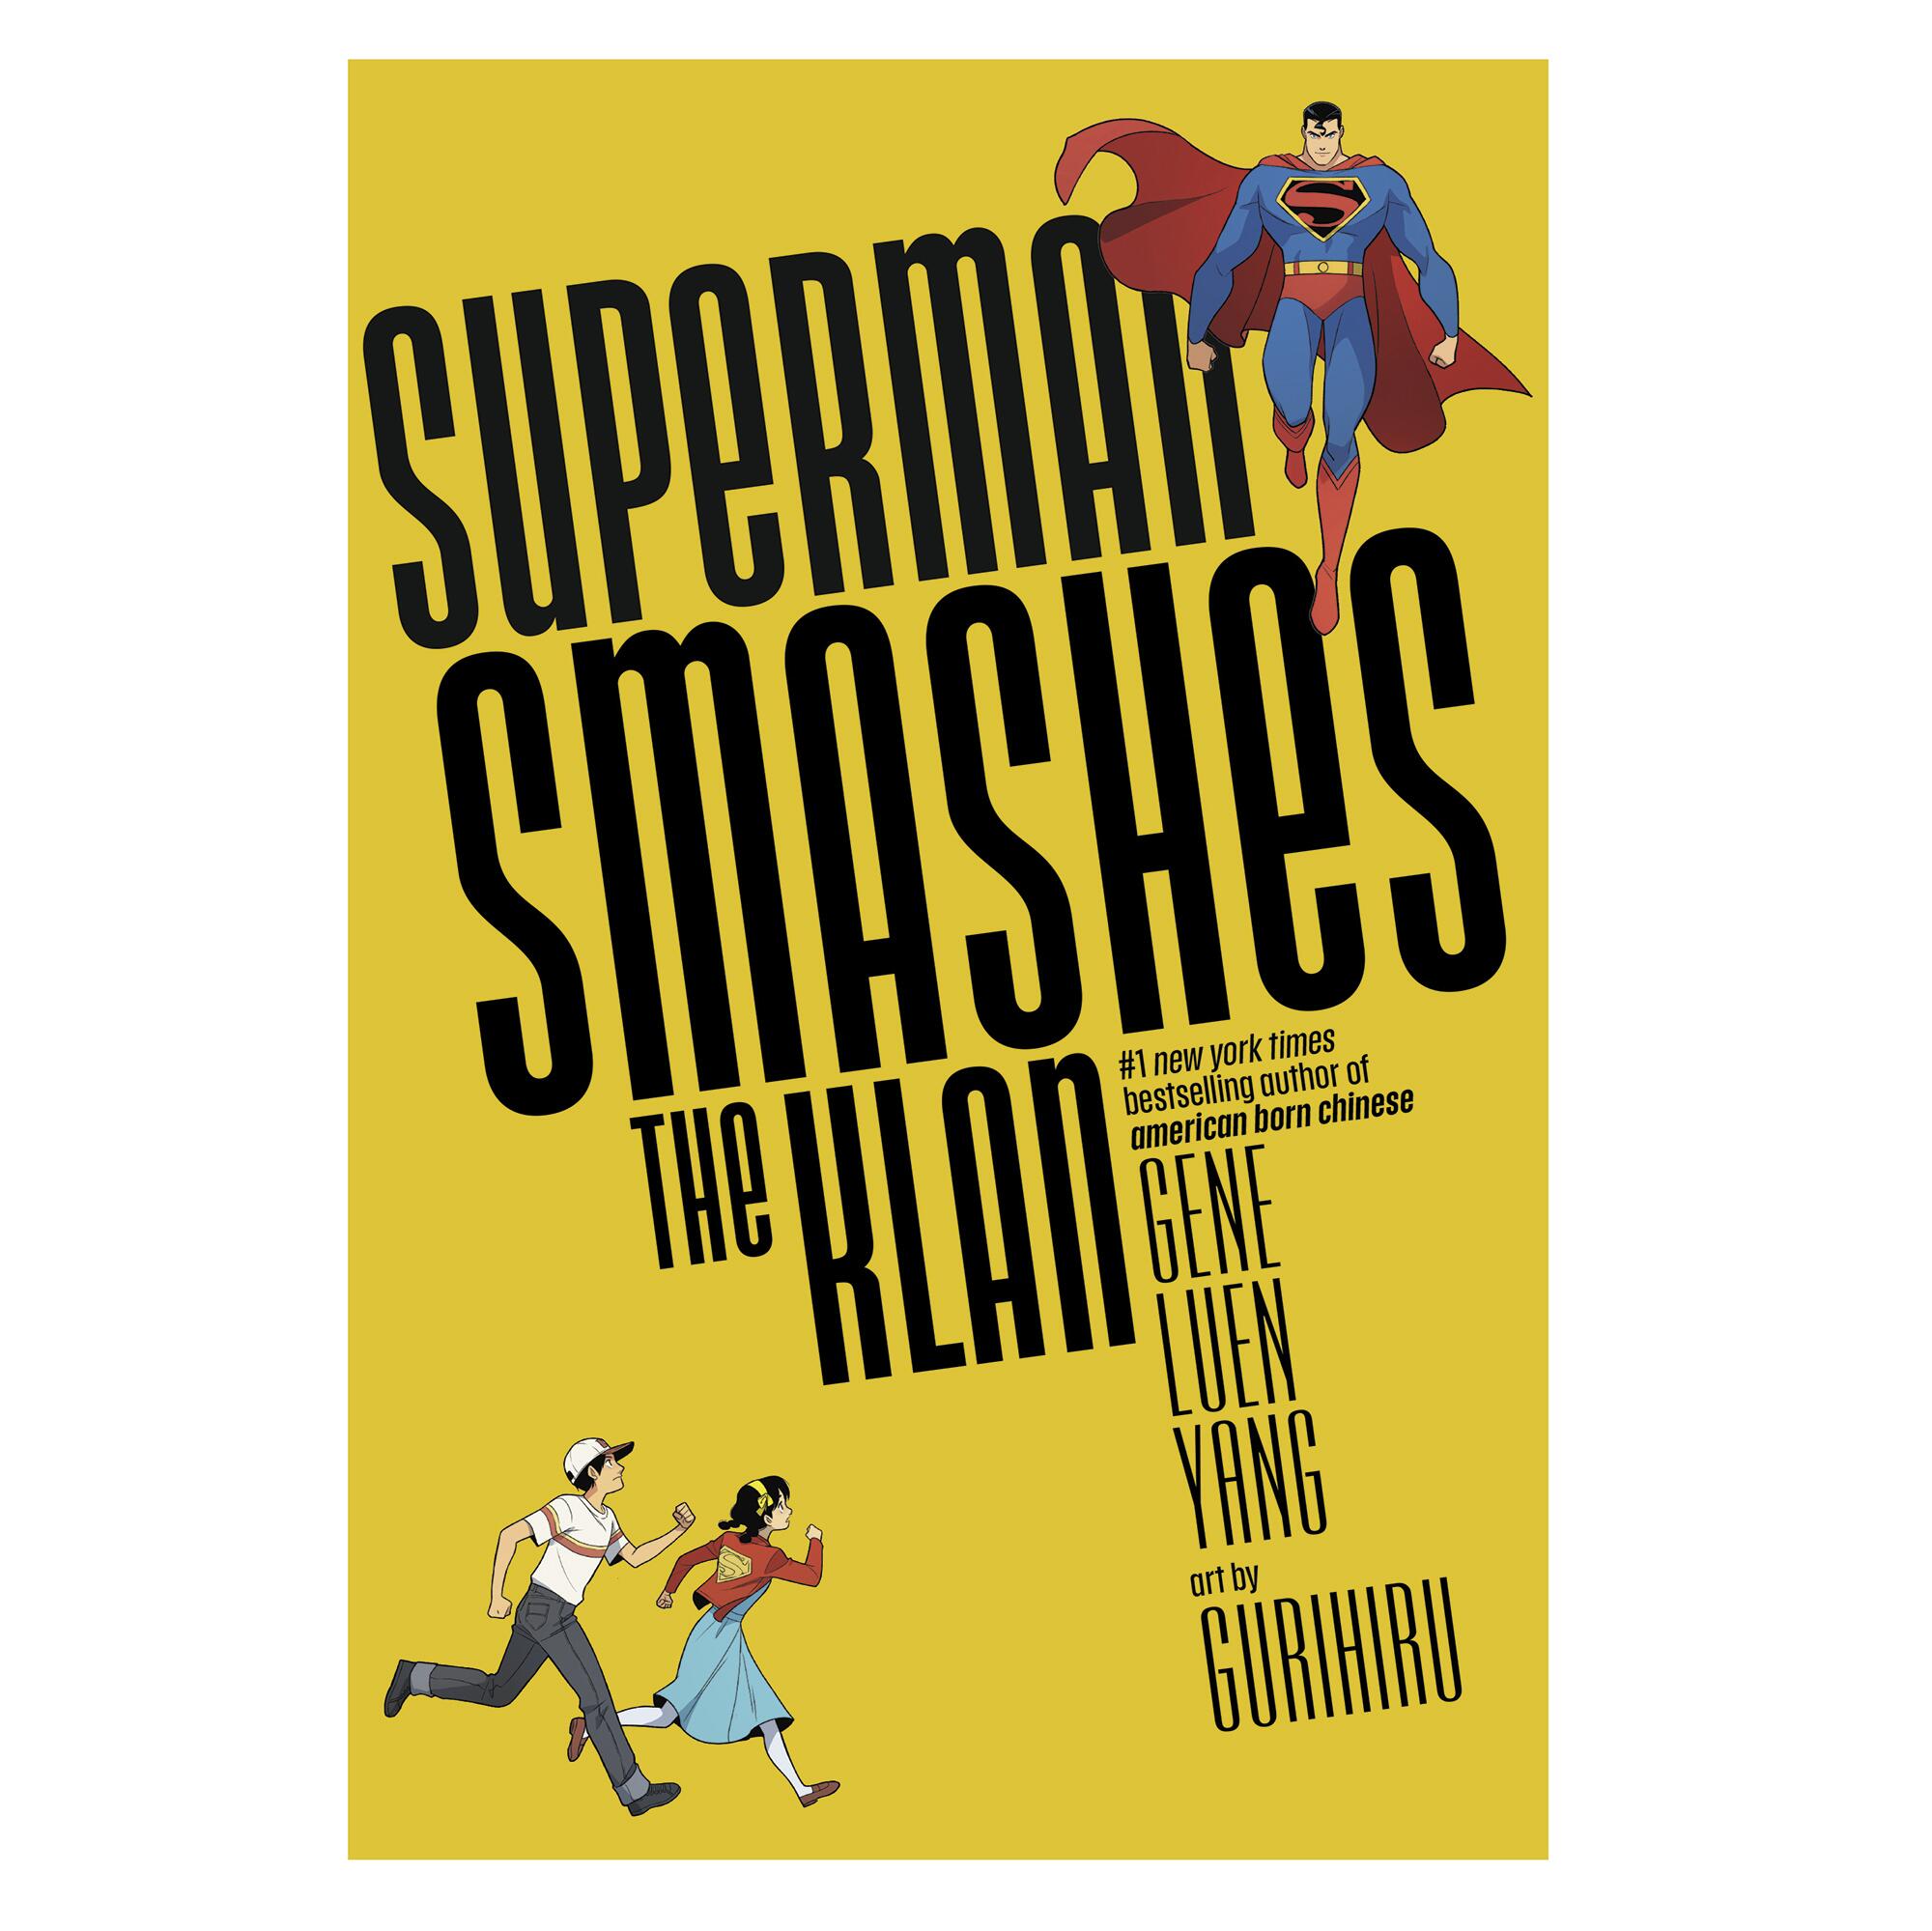 The cover of "Superman Smashes the Klan" by Gene Luen Yang and Gurihiru. Credit: DC